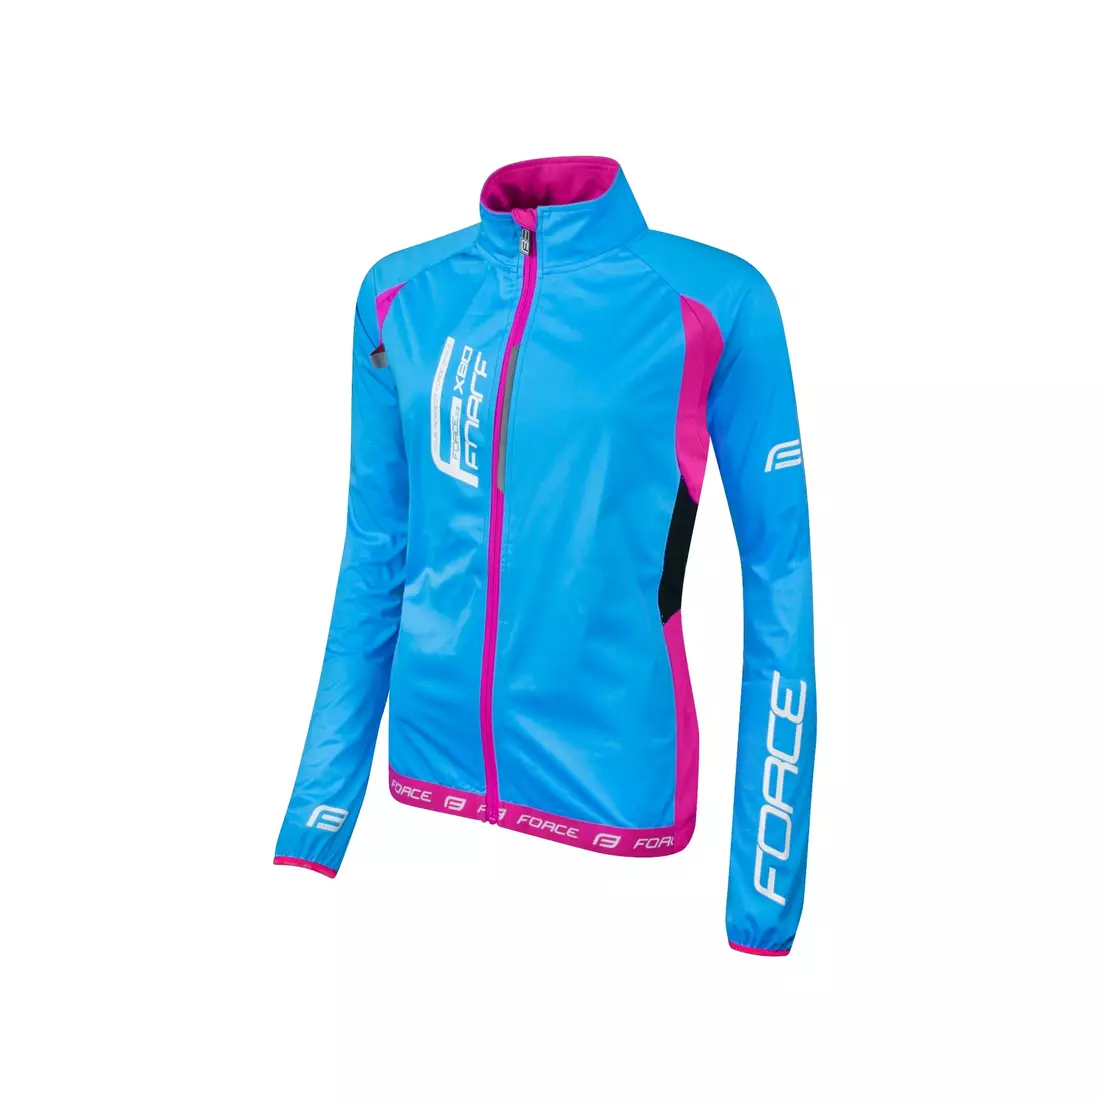 FORCE X80 SOFTSHELL Women's lightweight cycling jacket, non-insulated, blue